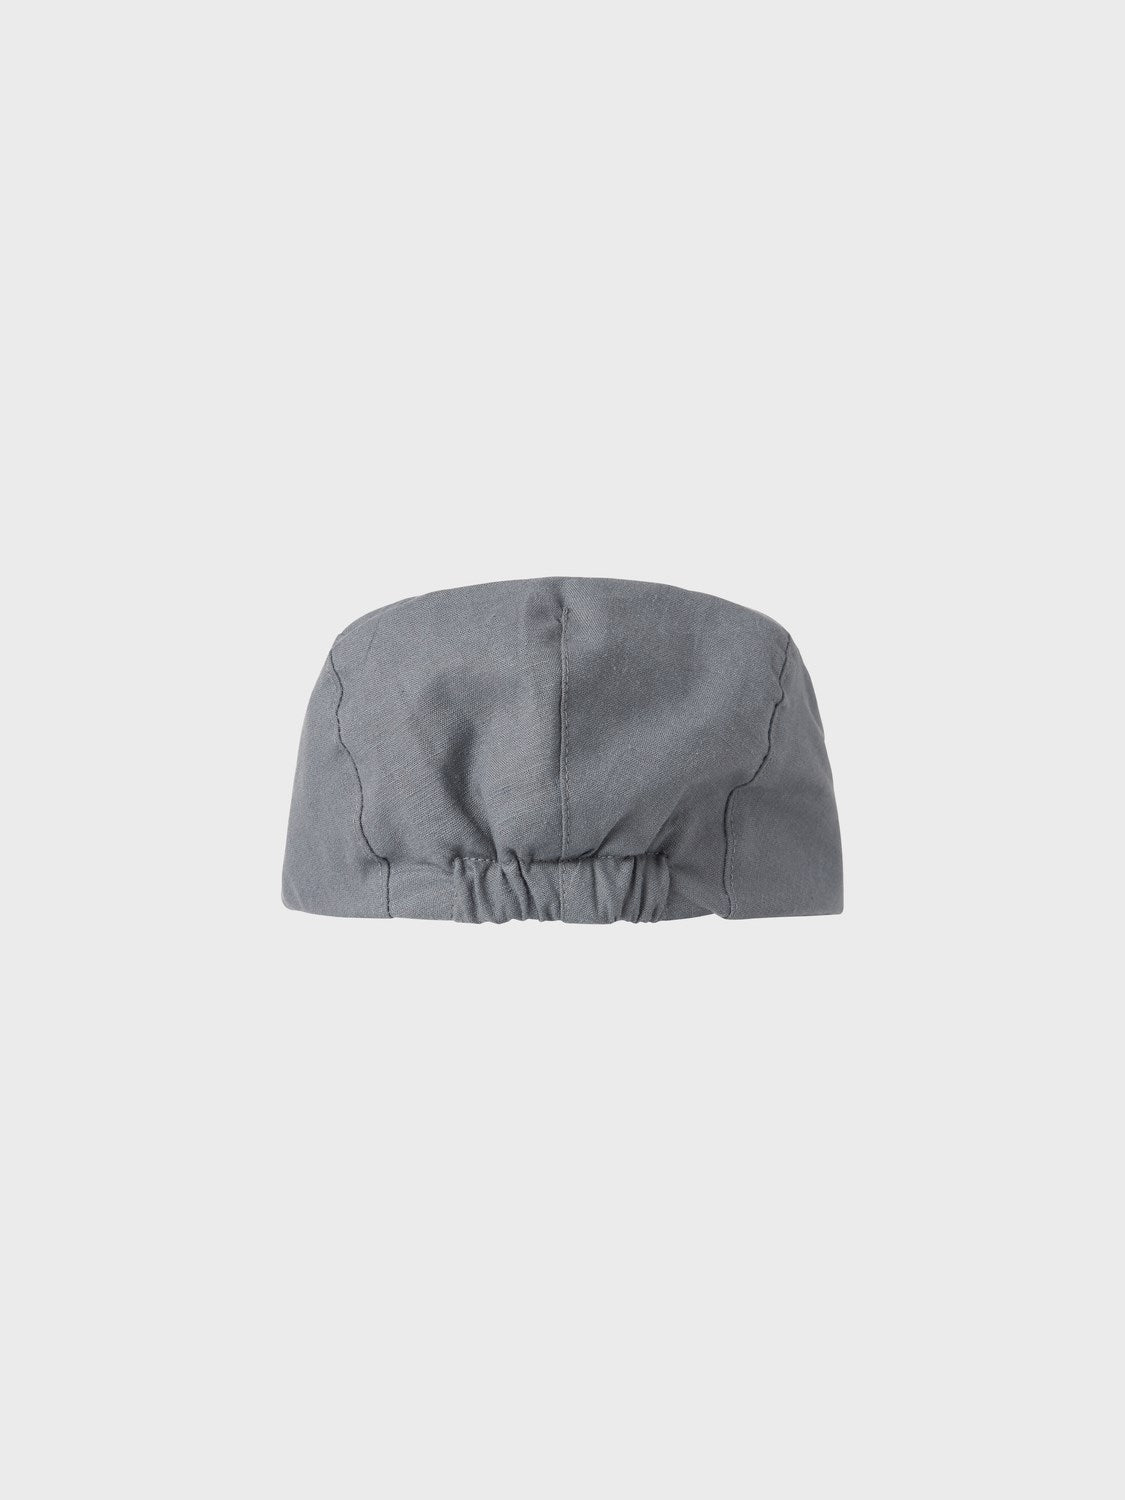 Lil Atelier | Felix Sixpence hat - Quiet Shade